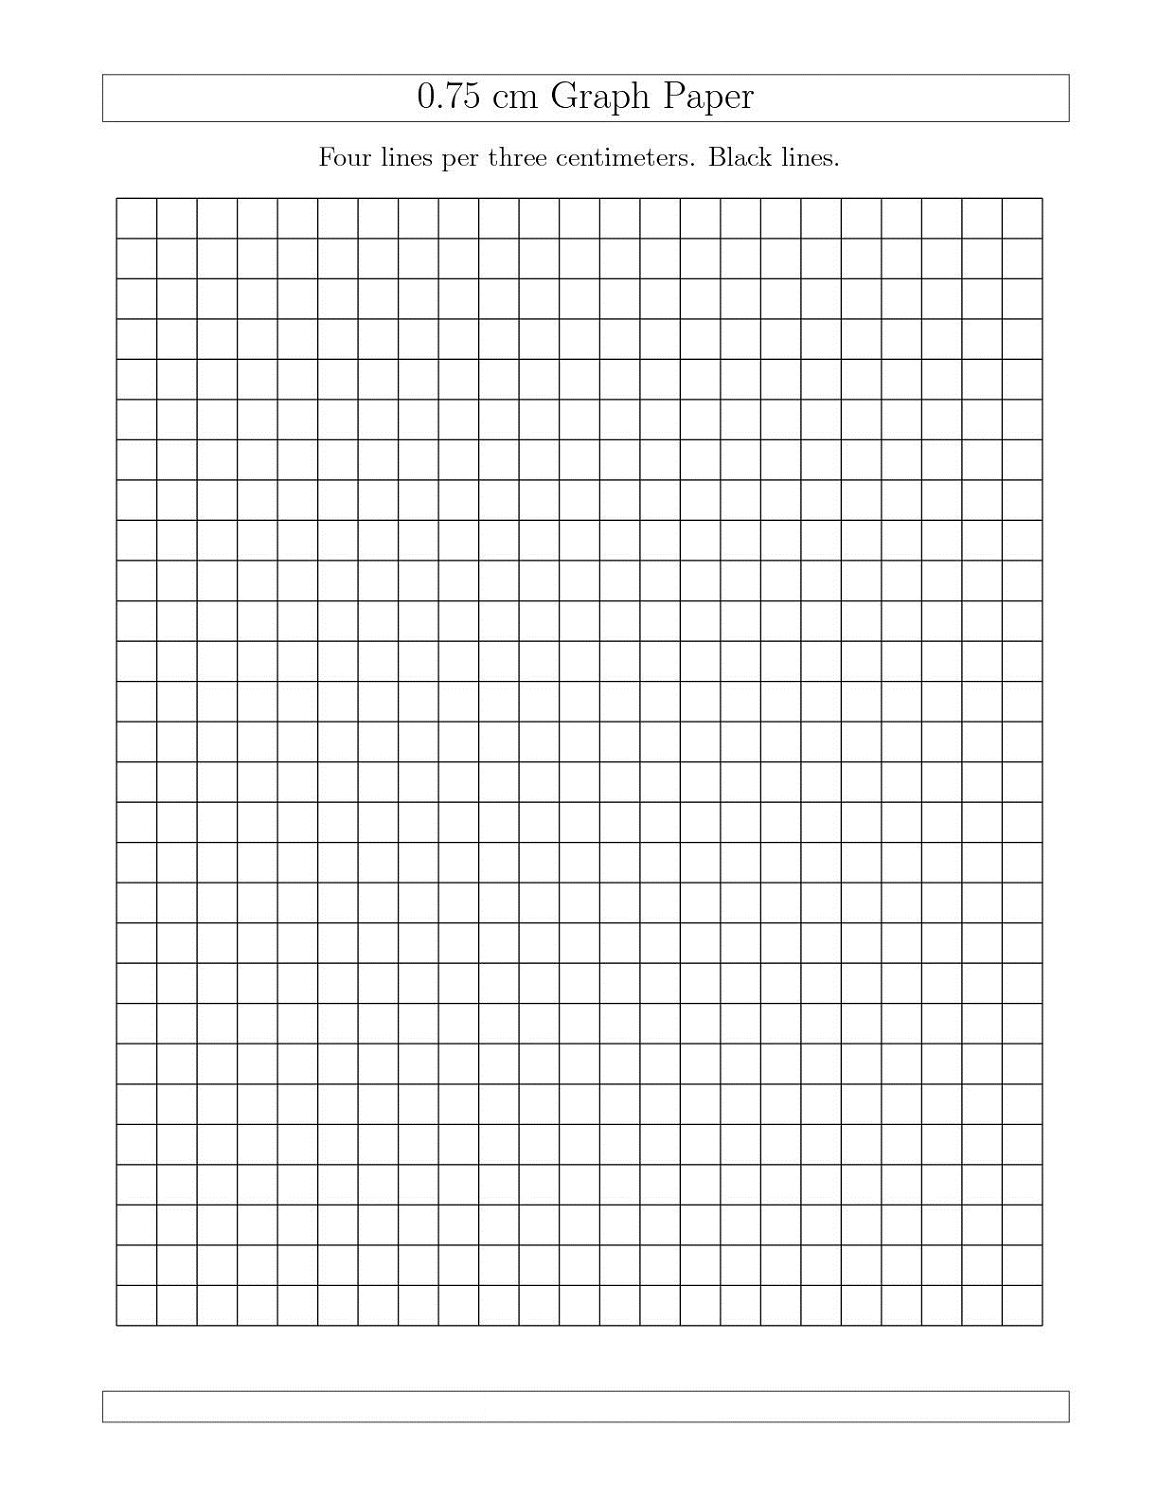 Pin On Ideas Graph Paper With Numbers Up To 10 15 20 25 30 100 Template Sheet Taylor Ponce